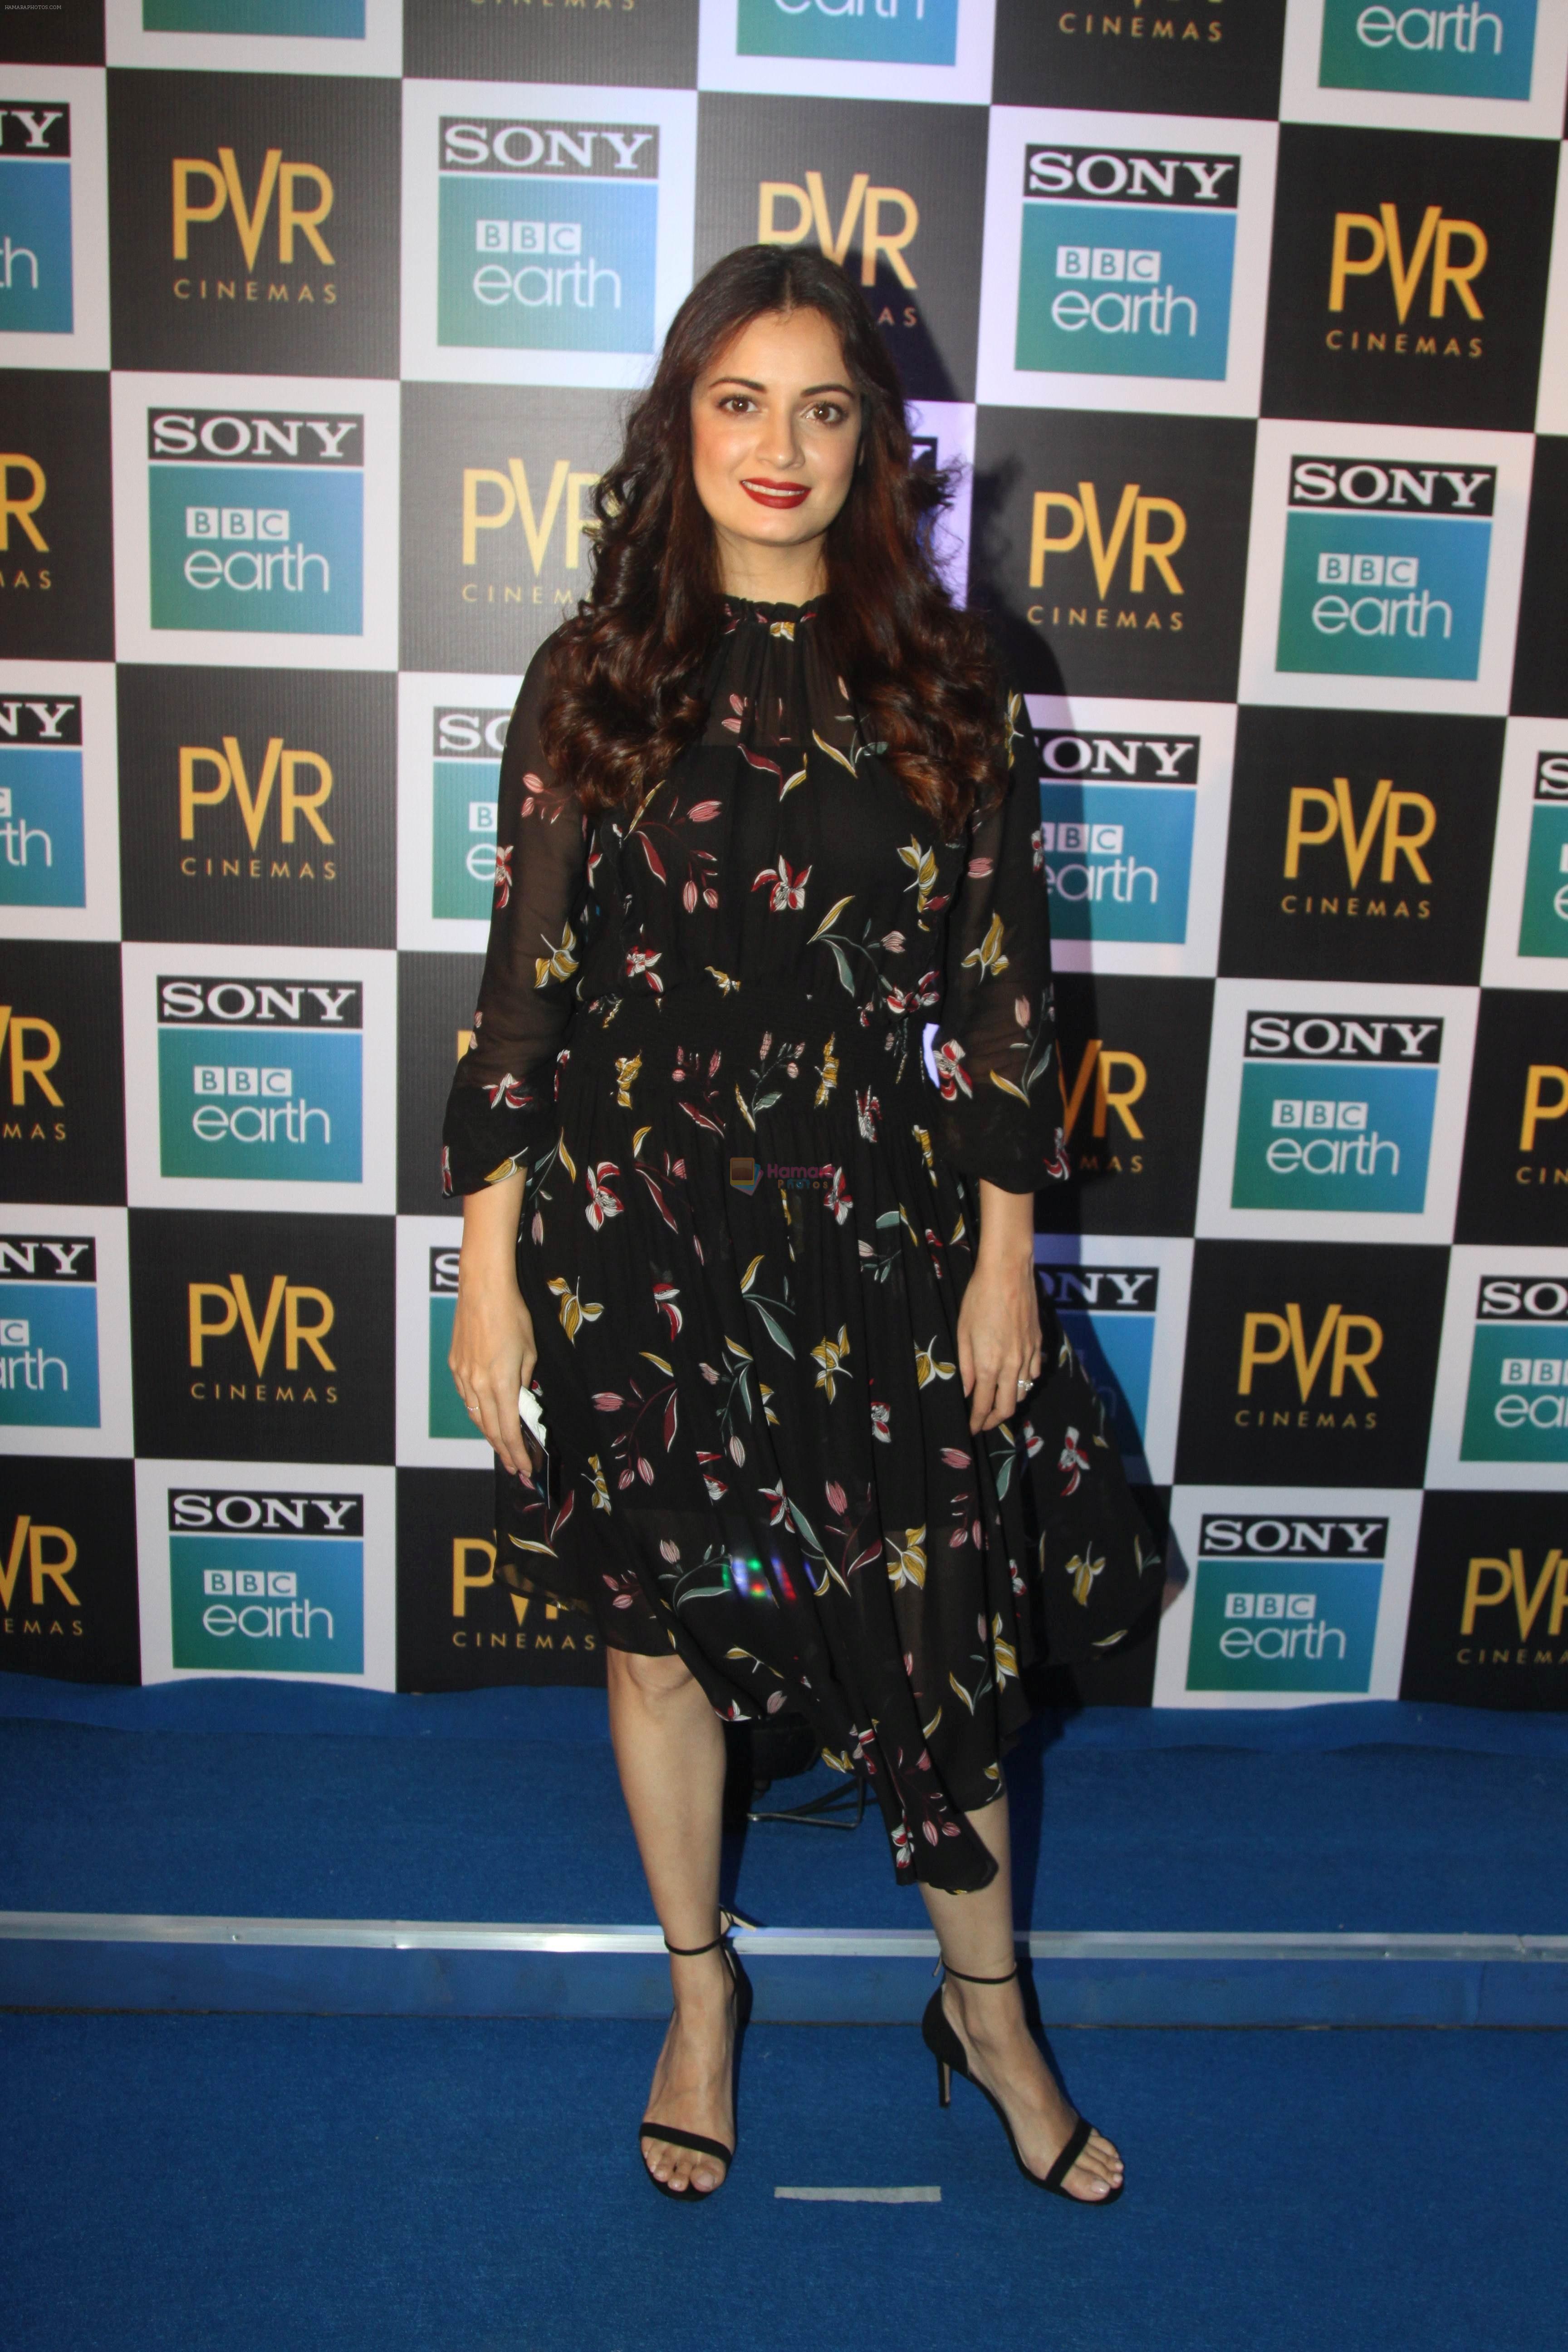 Dia Mirza at the Screening of Sony BBC Earth's film Blue Planet 2 at pvr icon in andheri on 15th May 2018